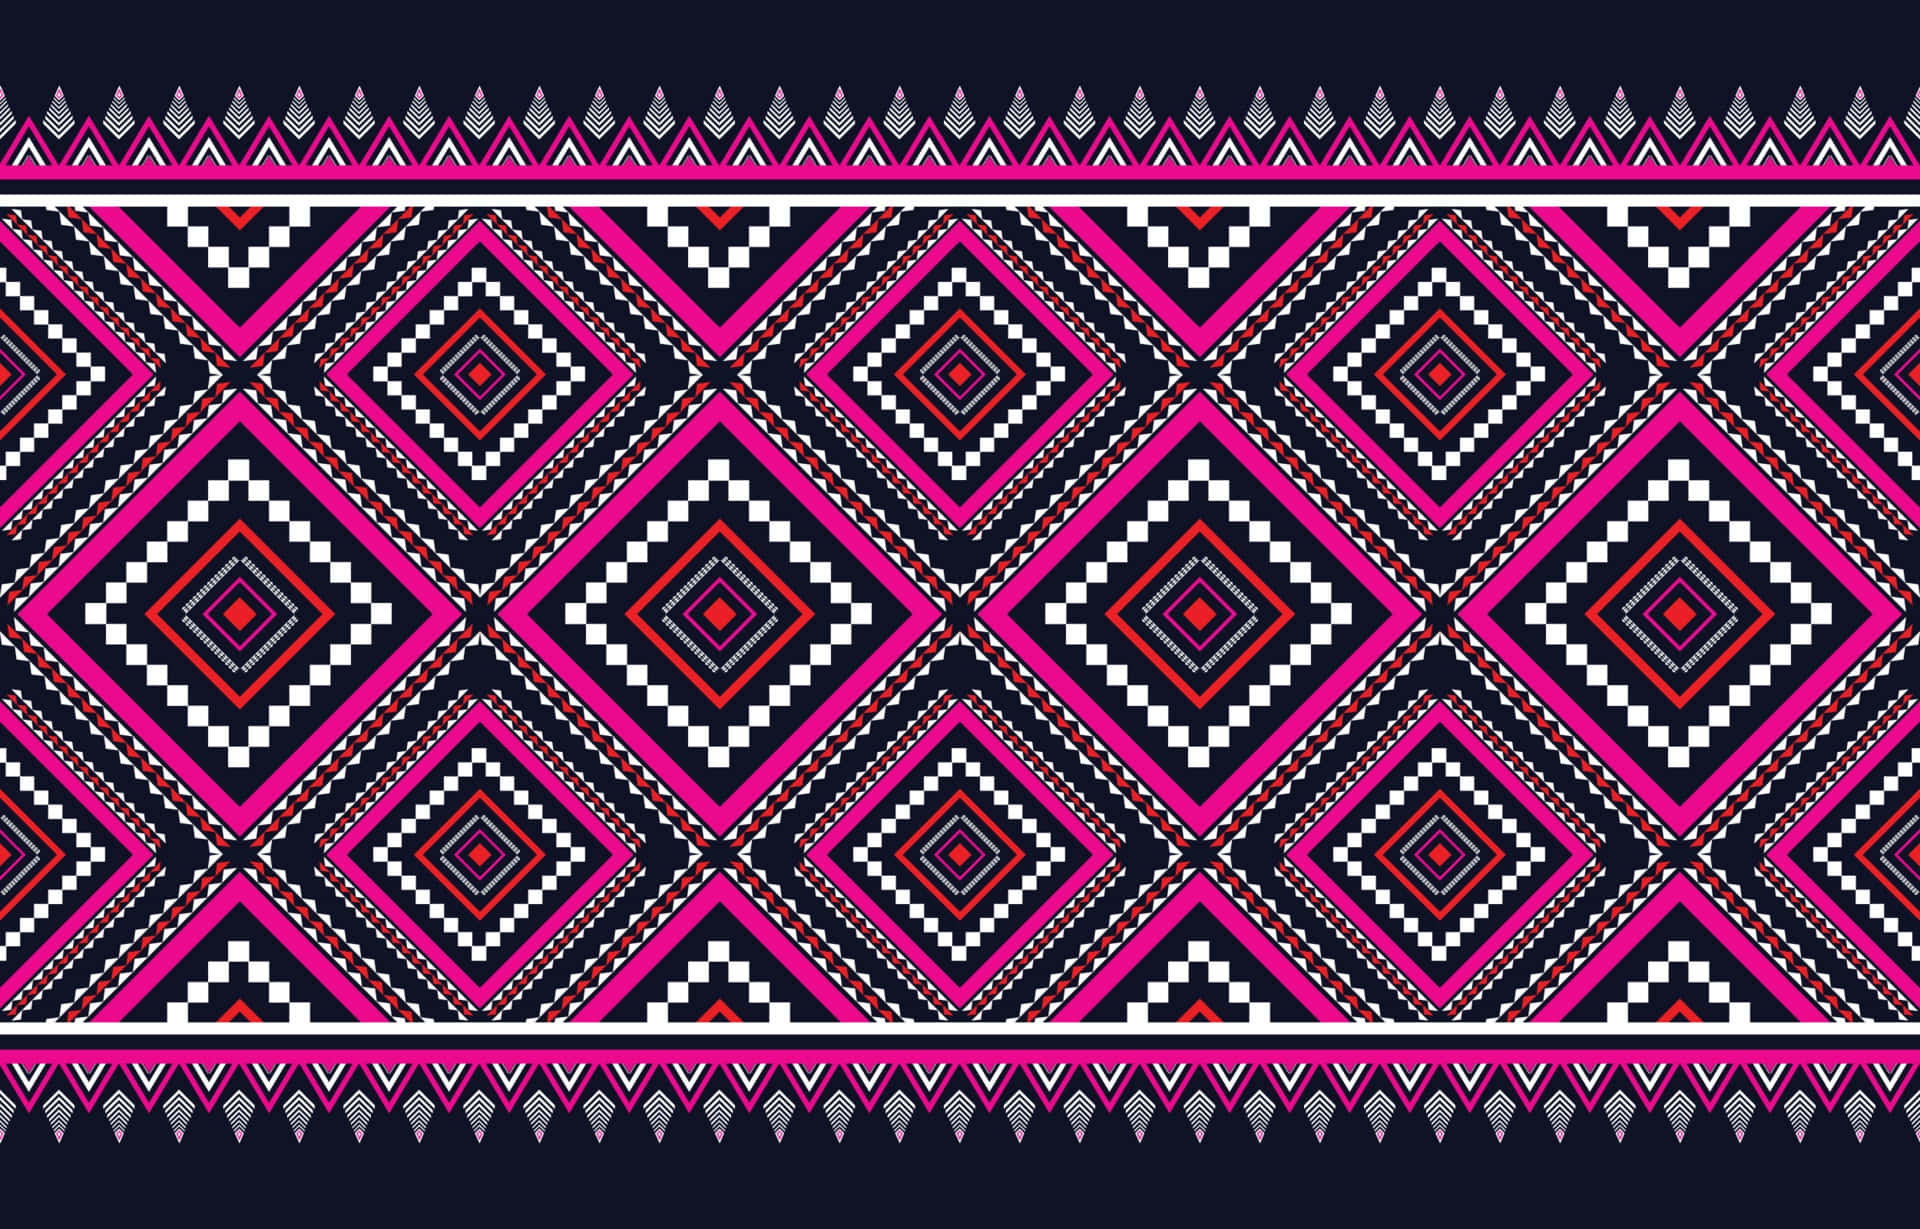 A Pink And Black Tribal Pattern